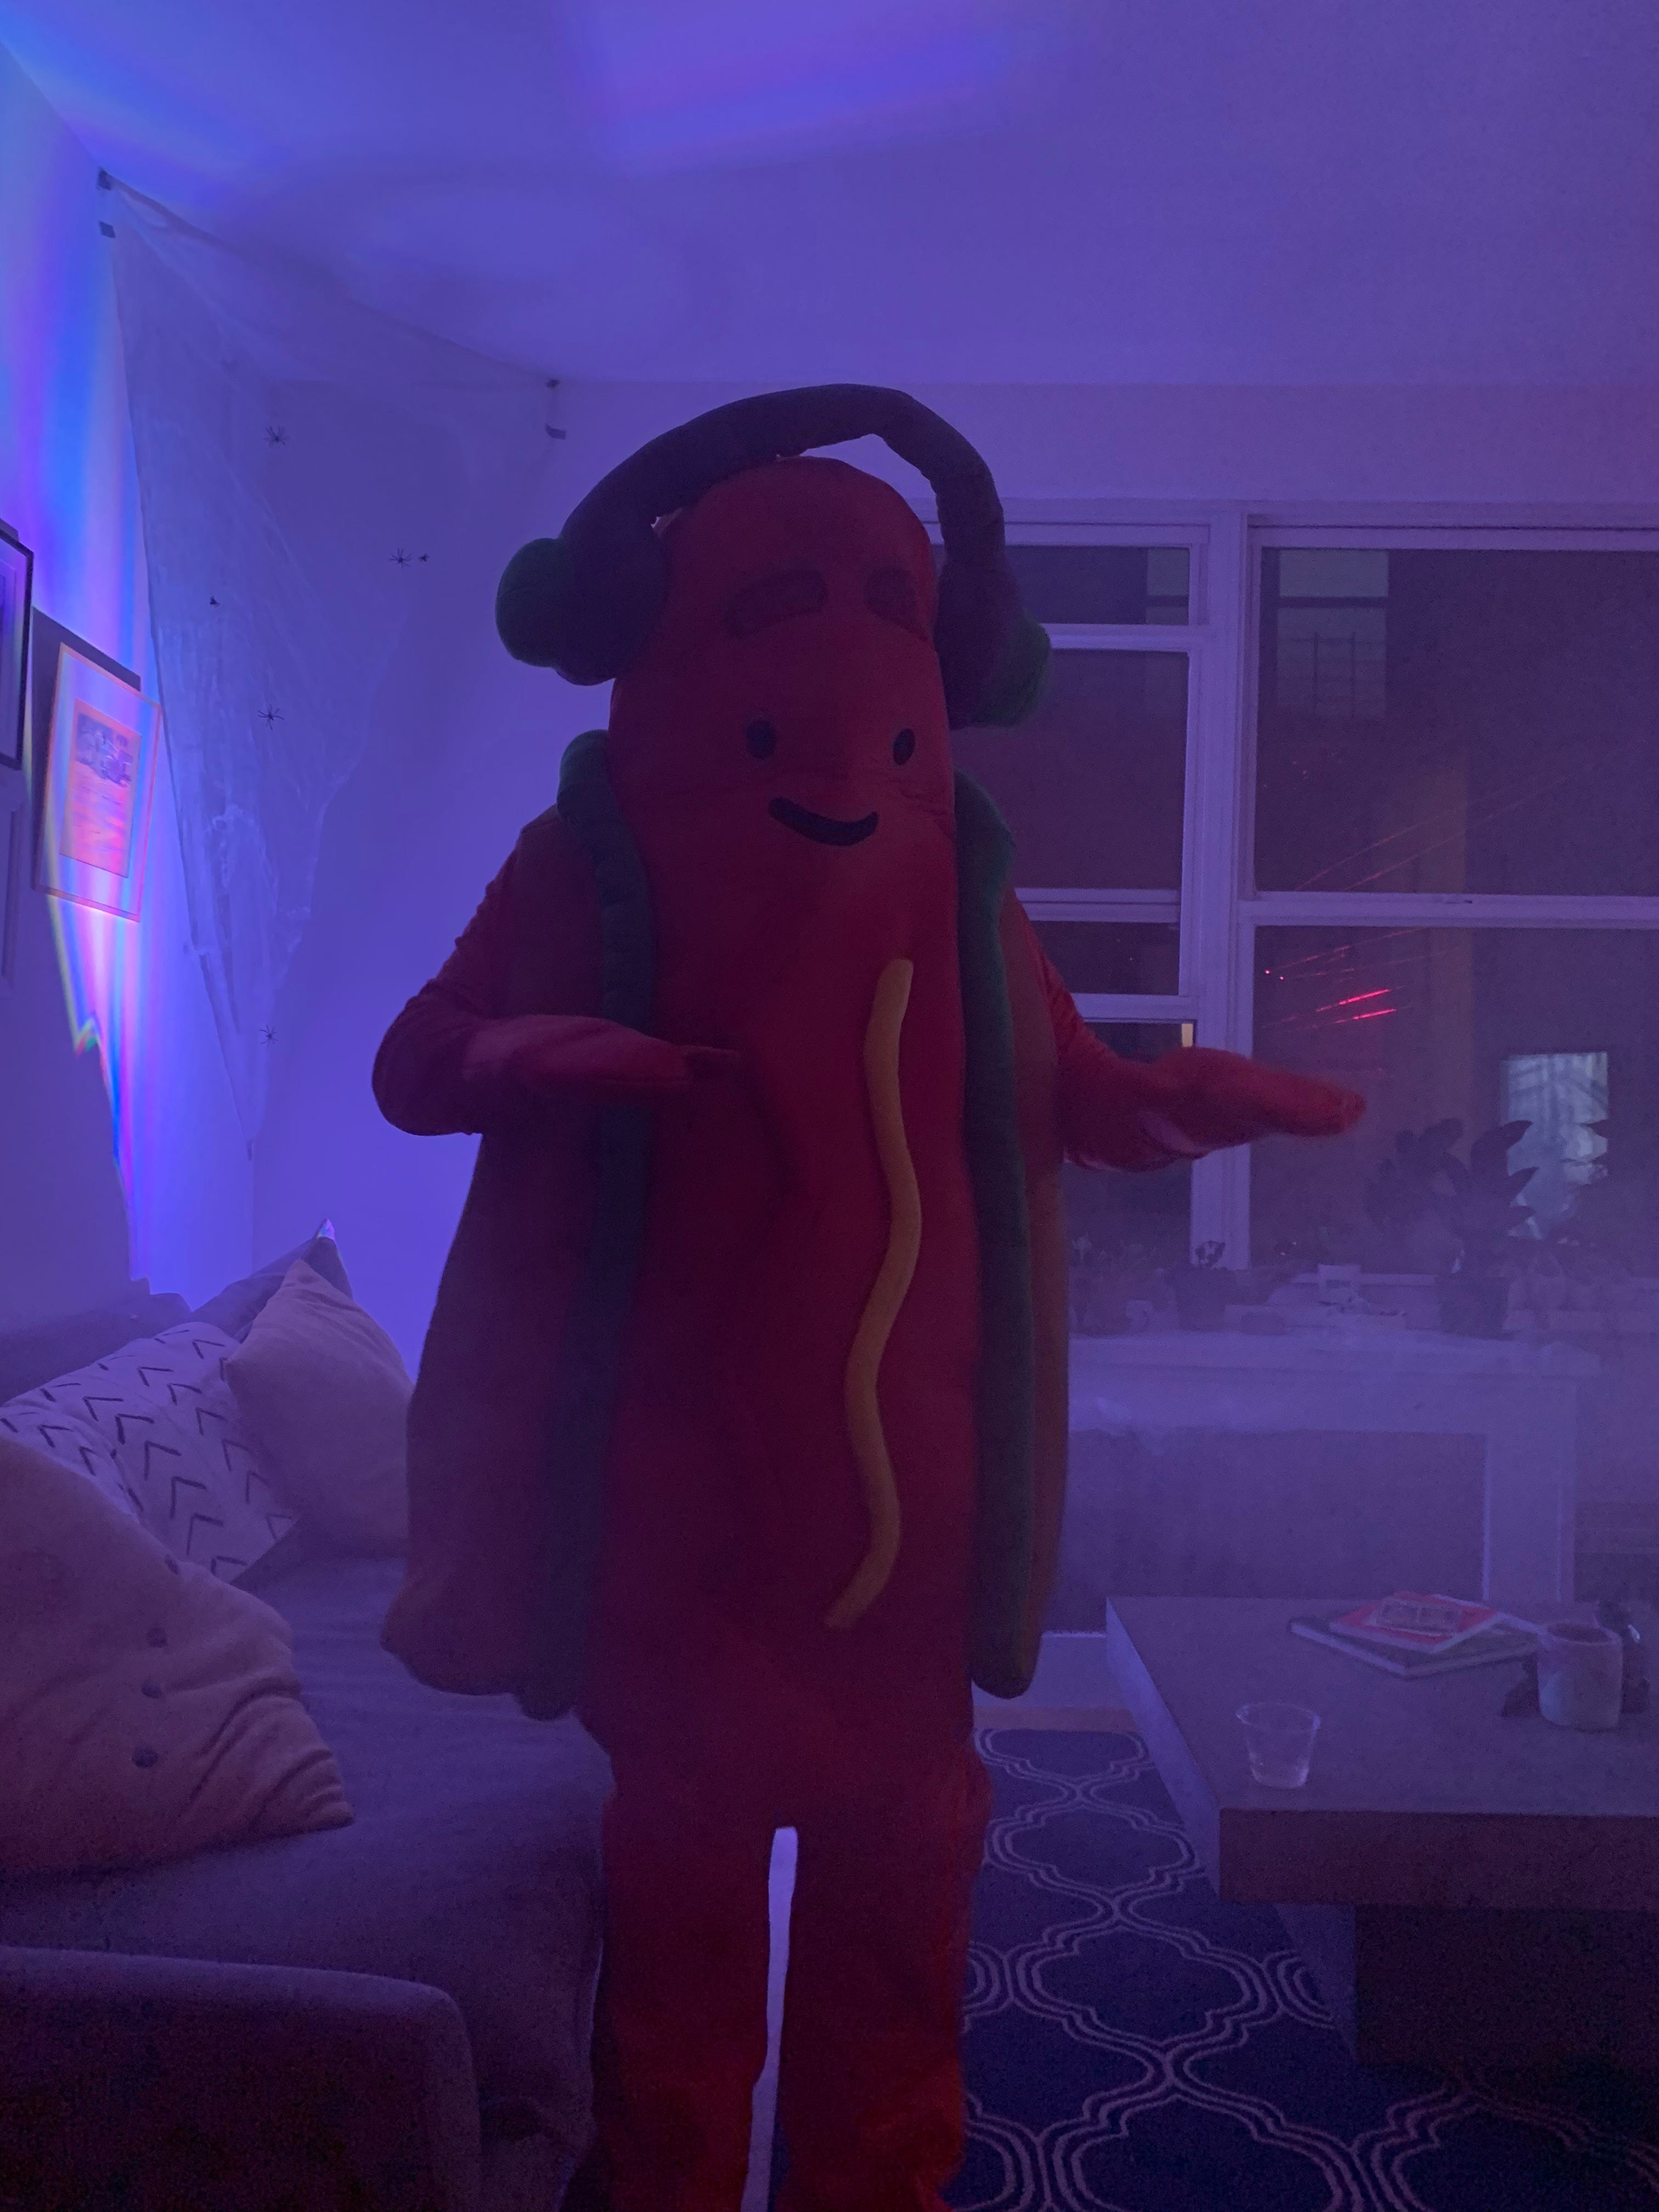 The Snapchat Dancing Hot Dog stands in a foggy apartment, ready to dance.